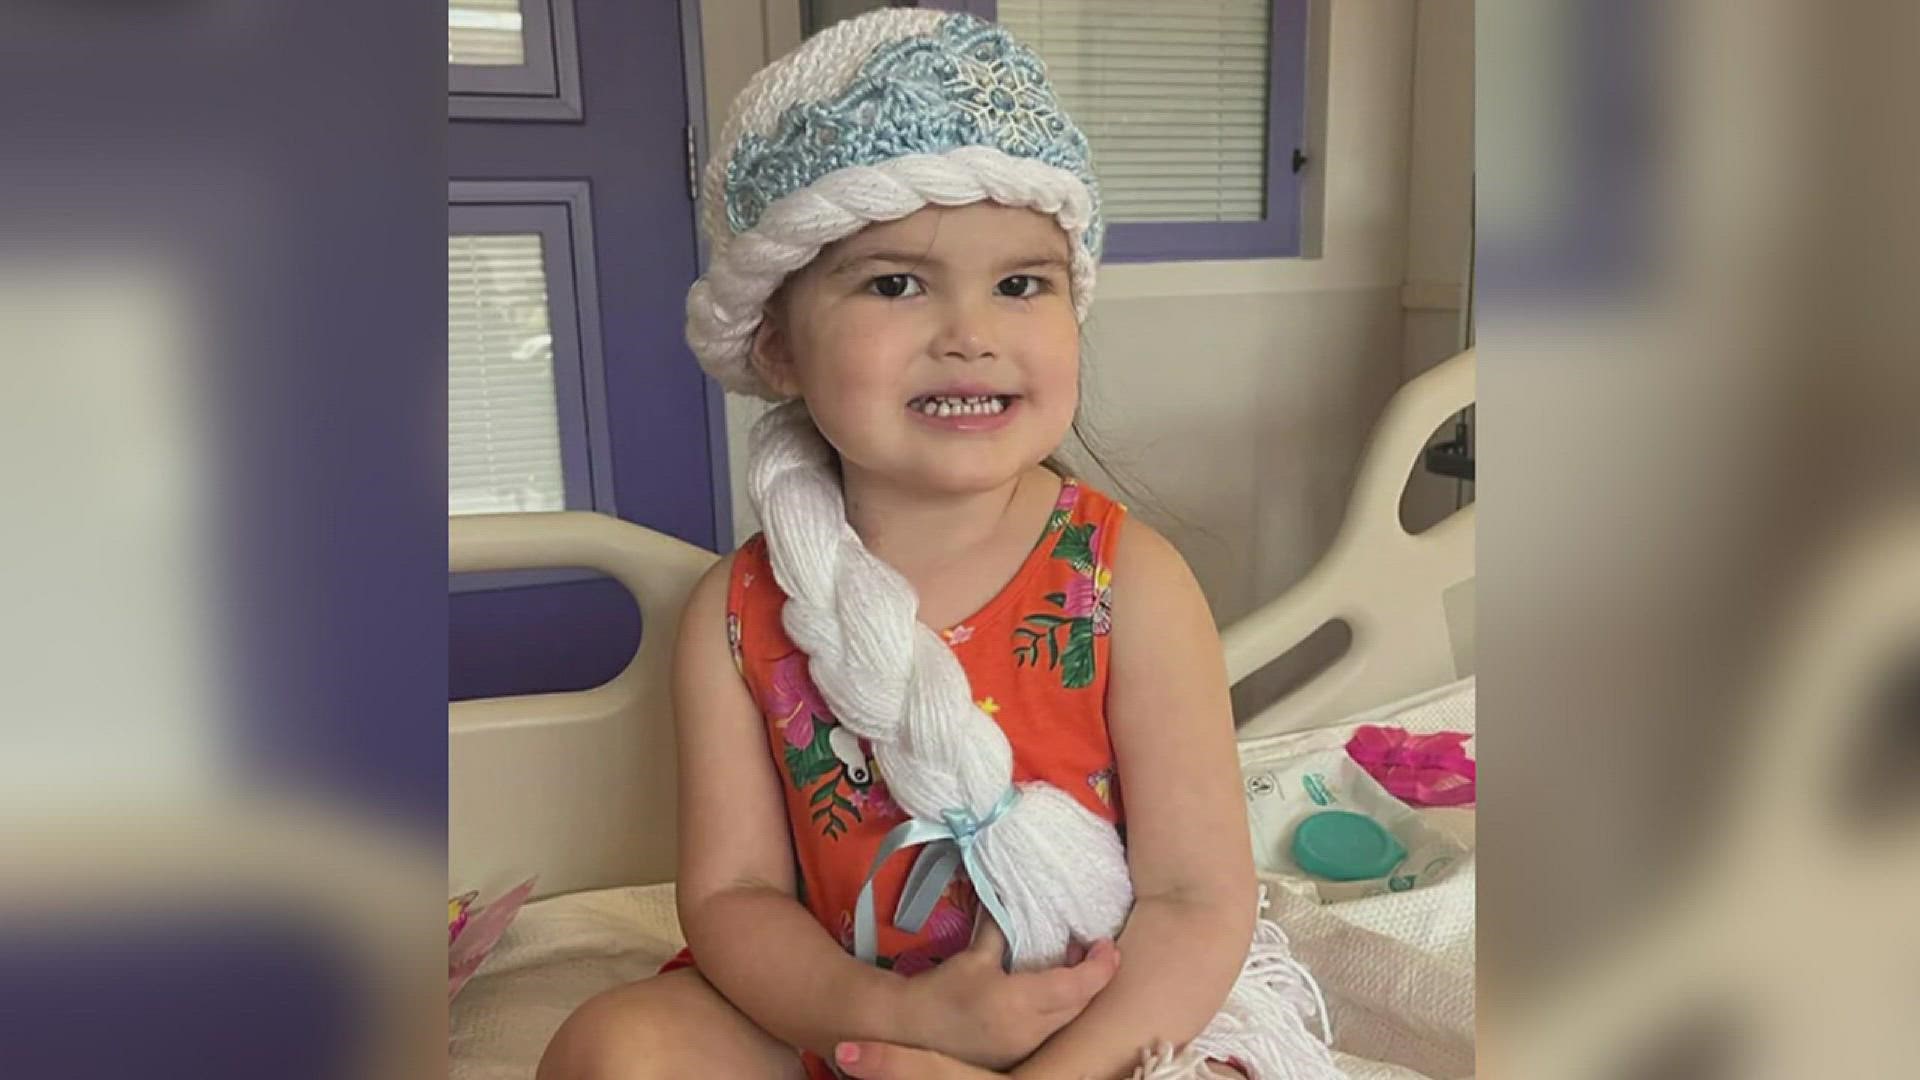 Madison Jackson was diagnosed with leukemia when she was 2 years old.